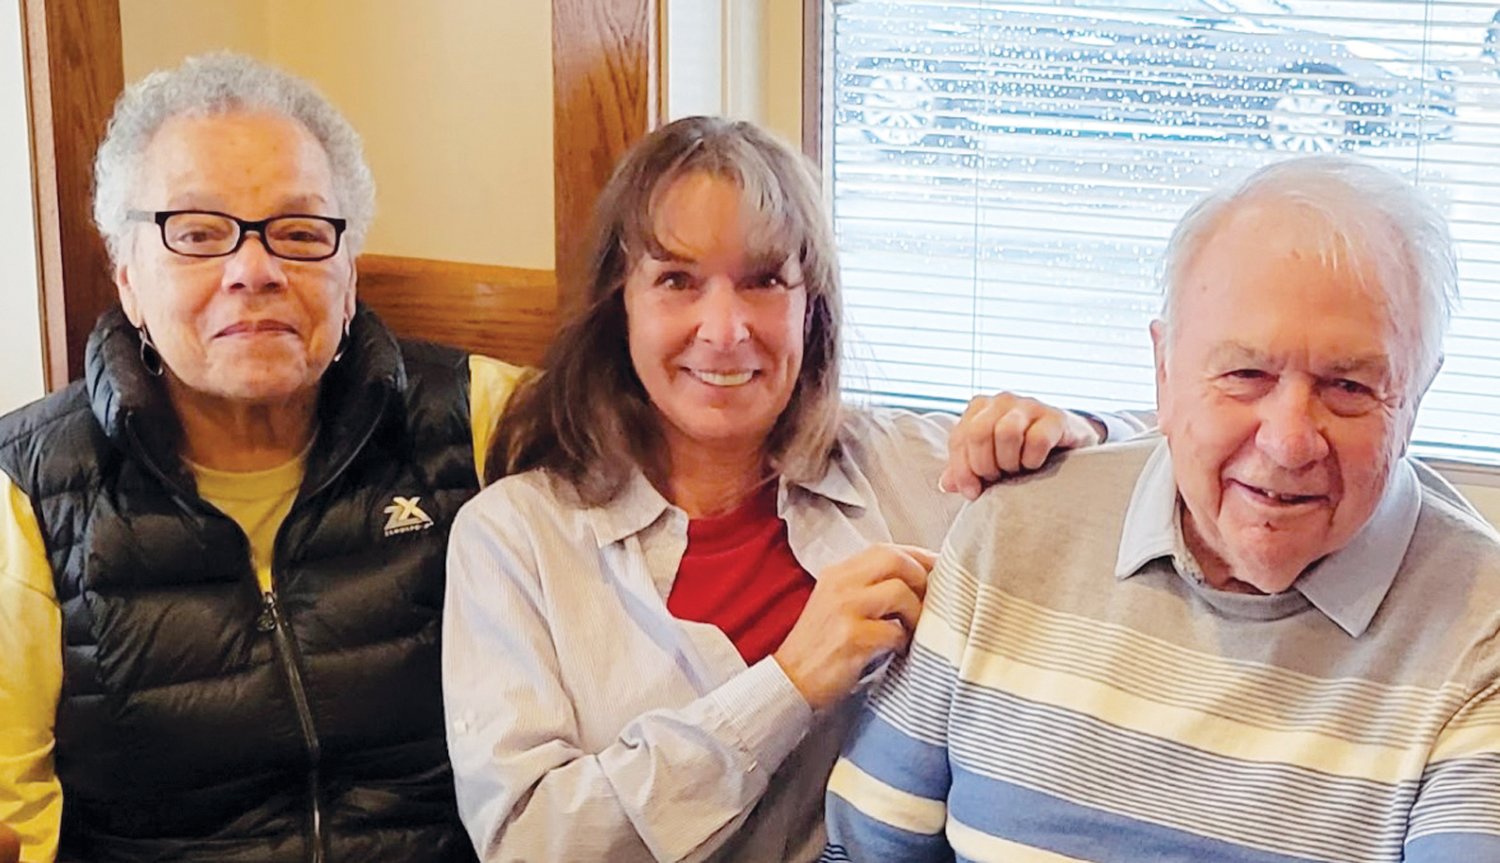 TEAM LEADERS: Gail Davis, Dona Damian and Vin Cullen at a recent lunch outing in East Providence.